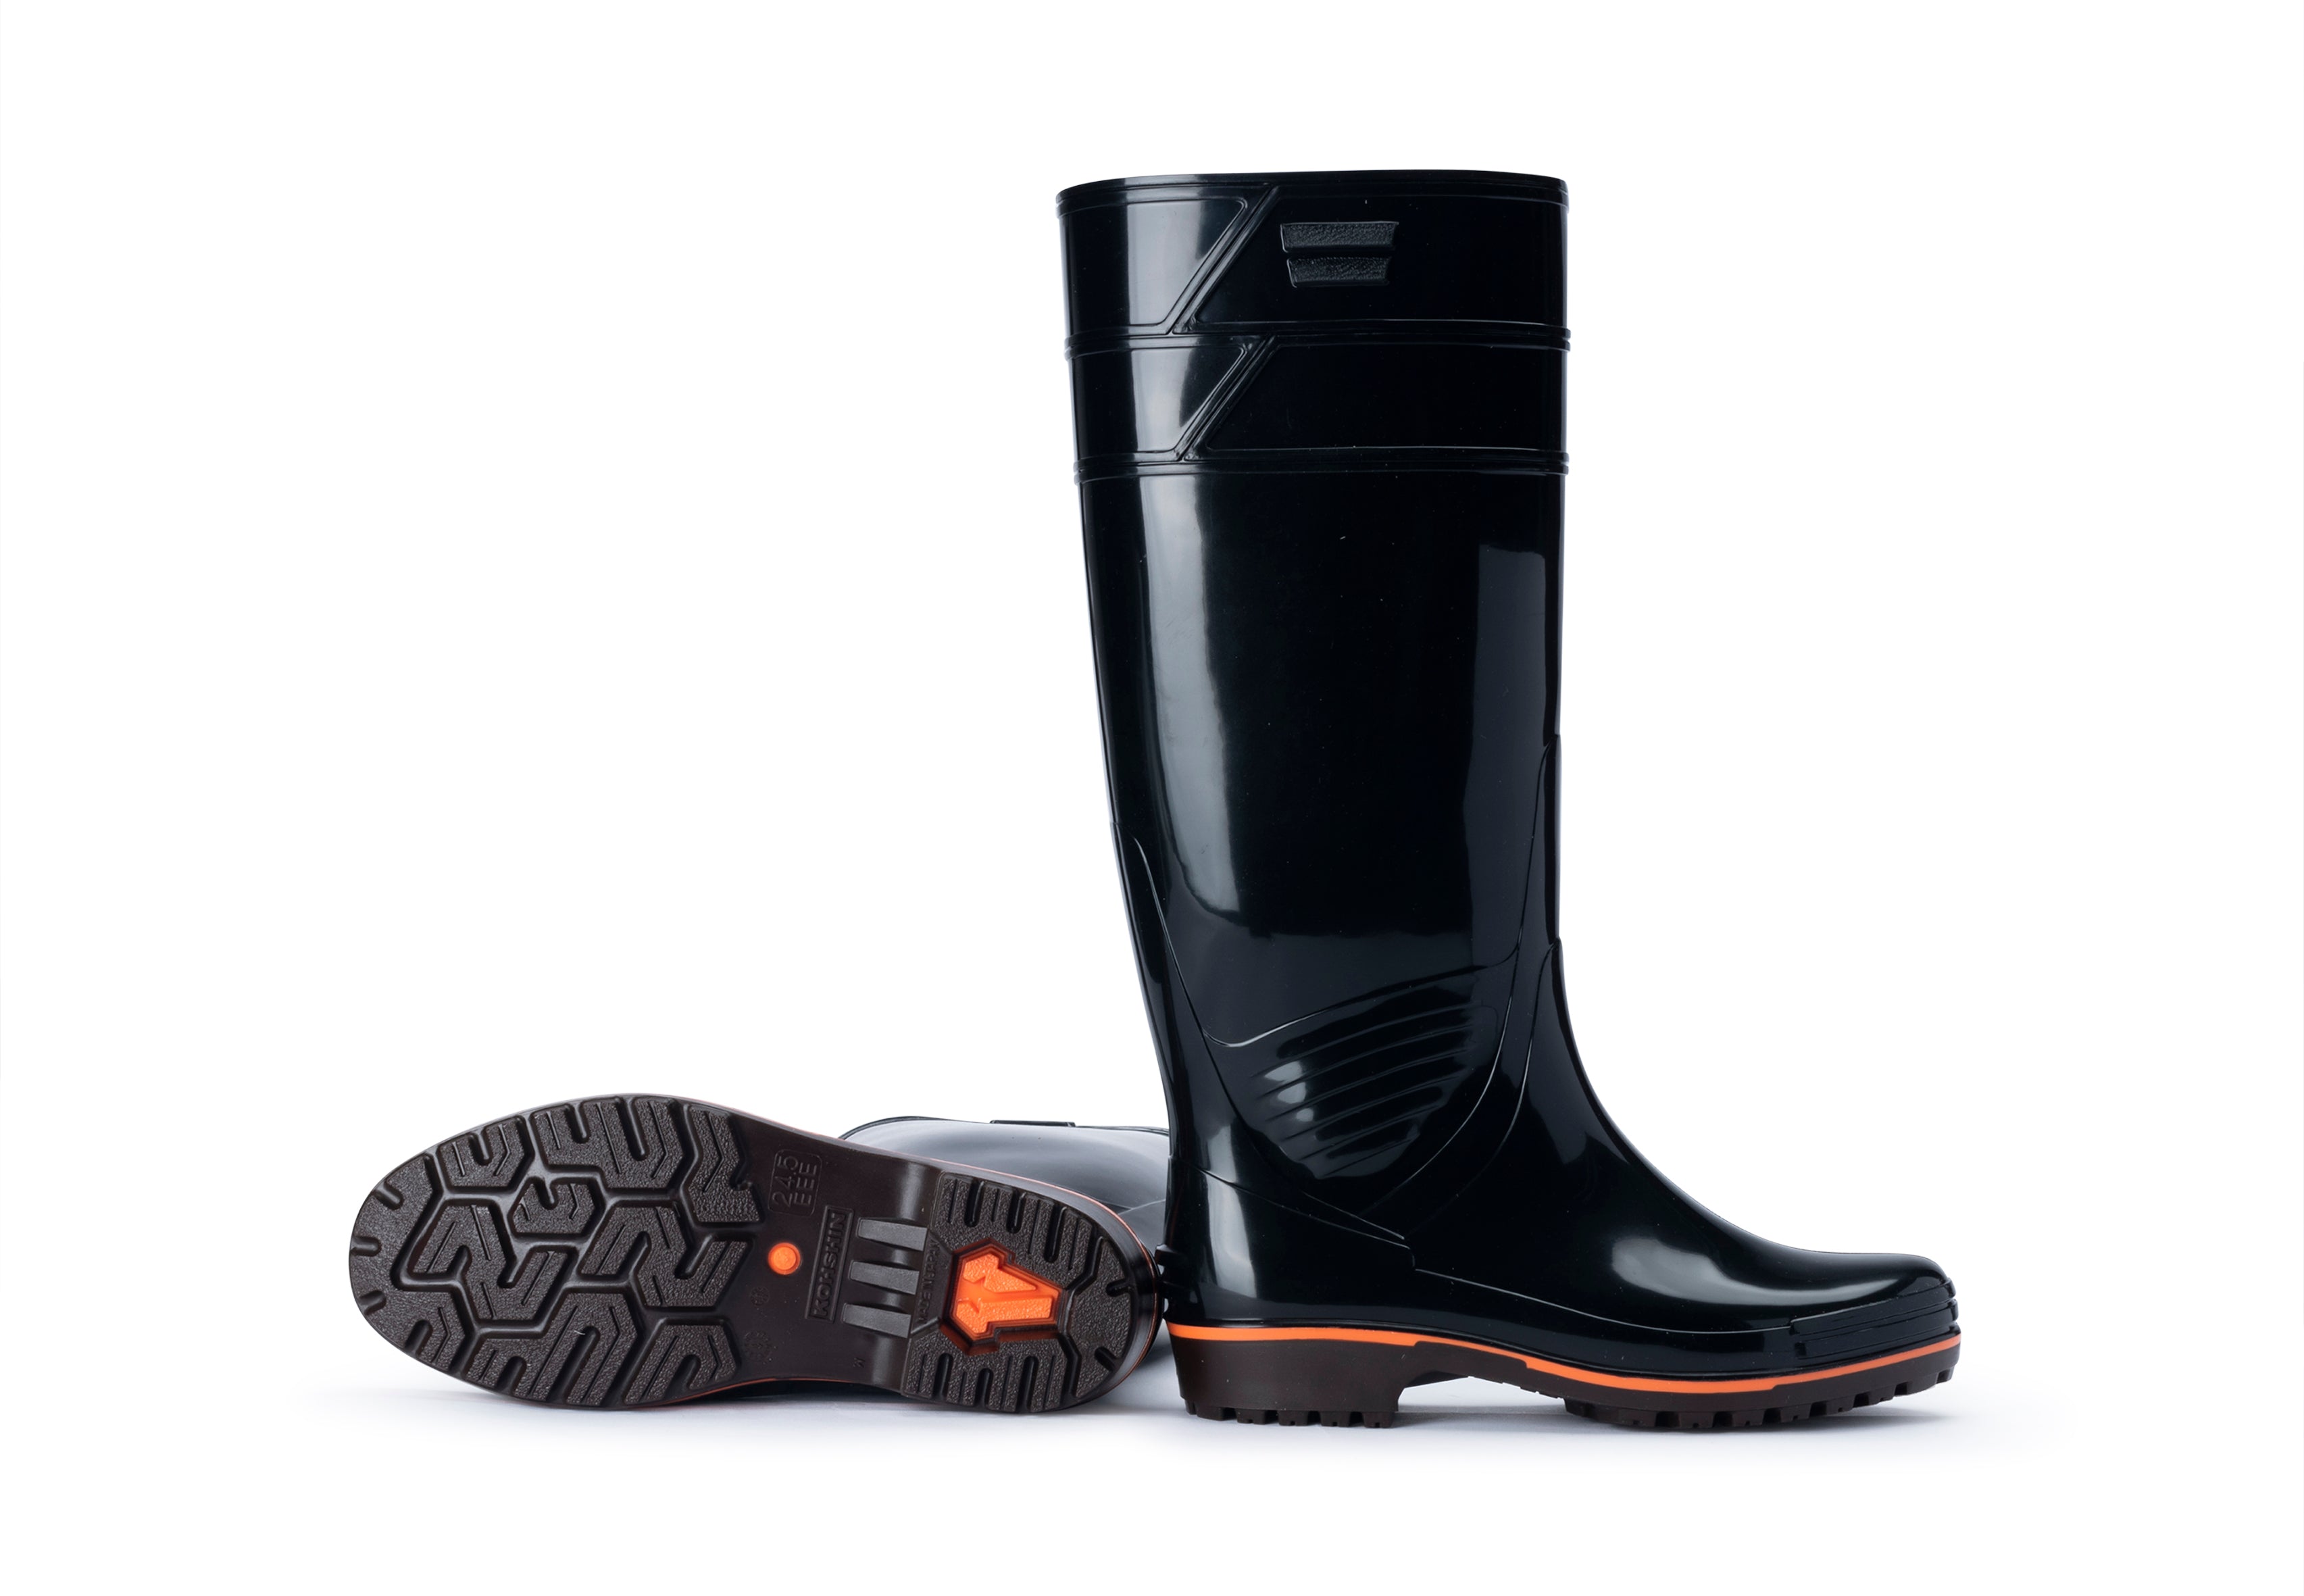 ZACTAS Z01 Extra High 40cm Rain Boots (Top Sales in Japan)